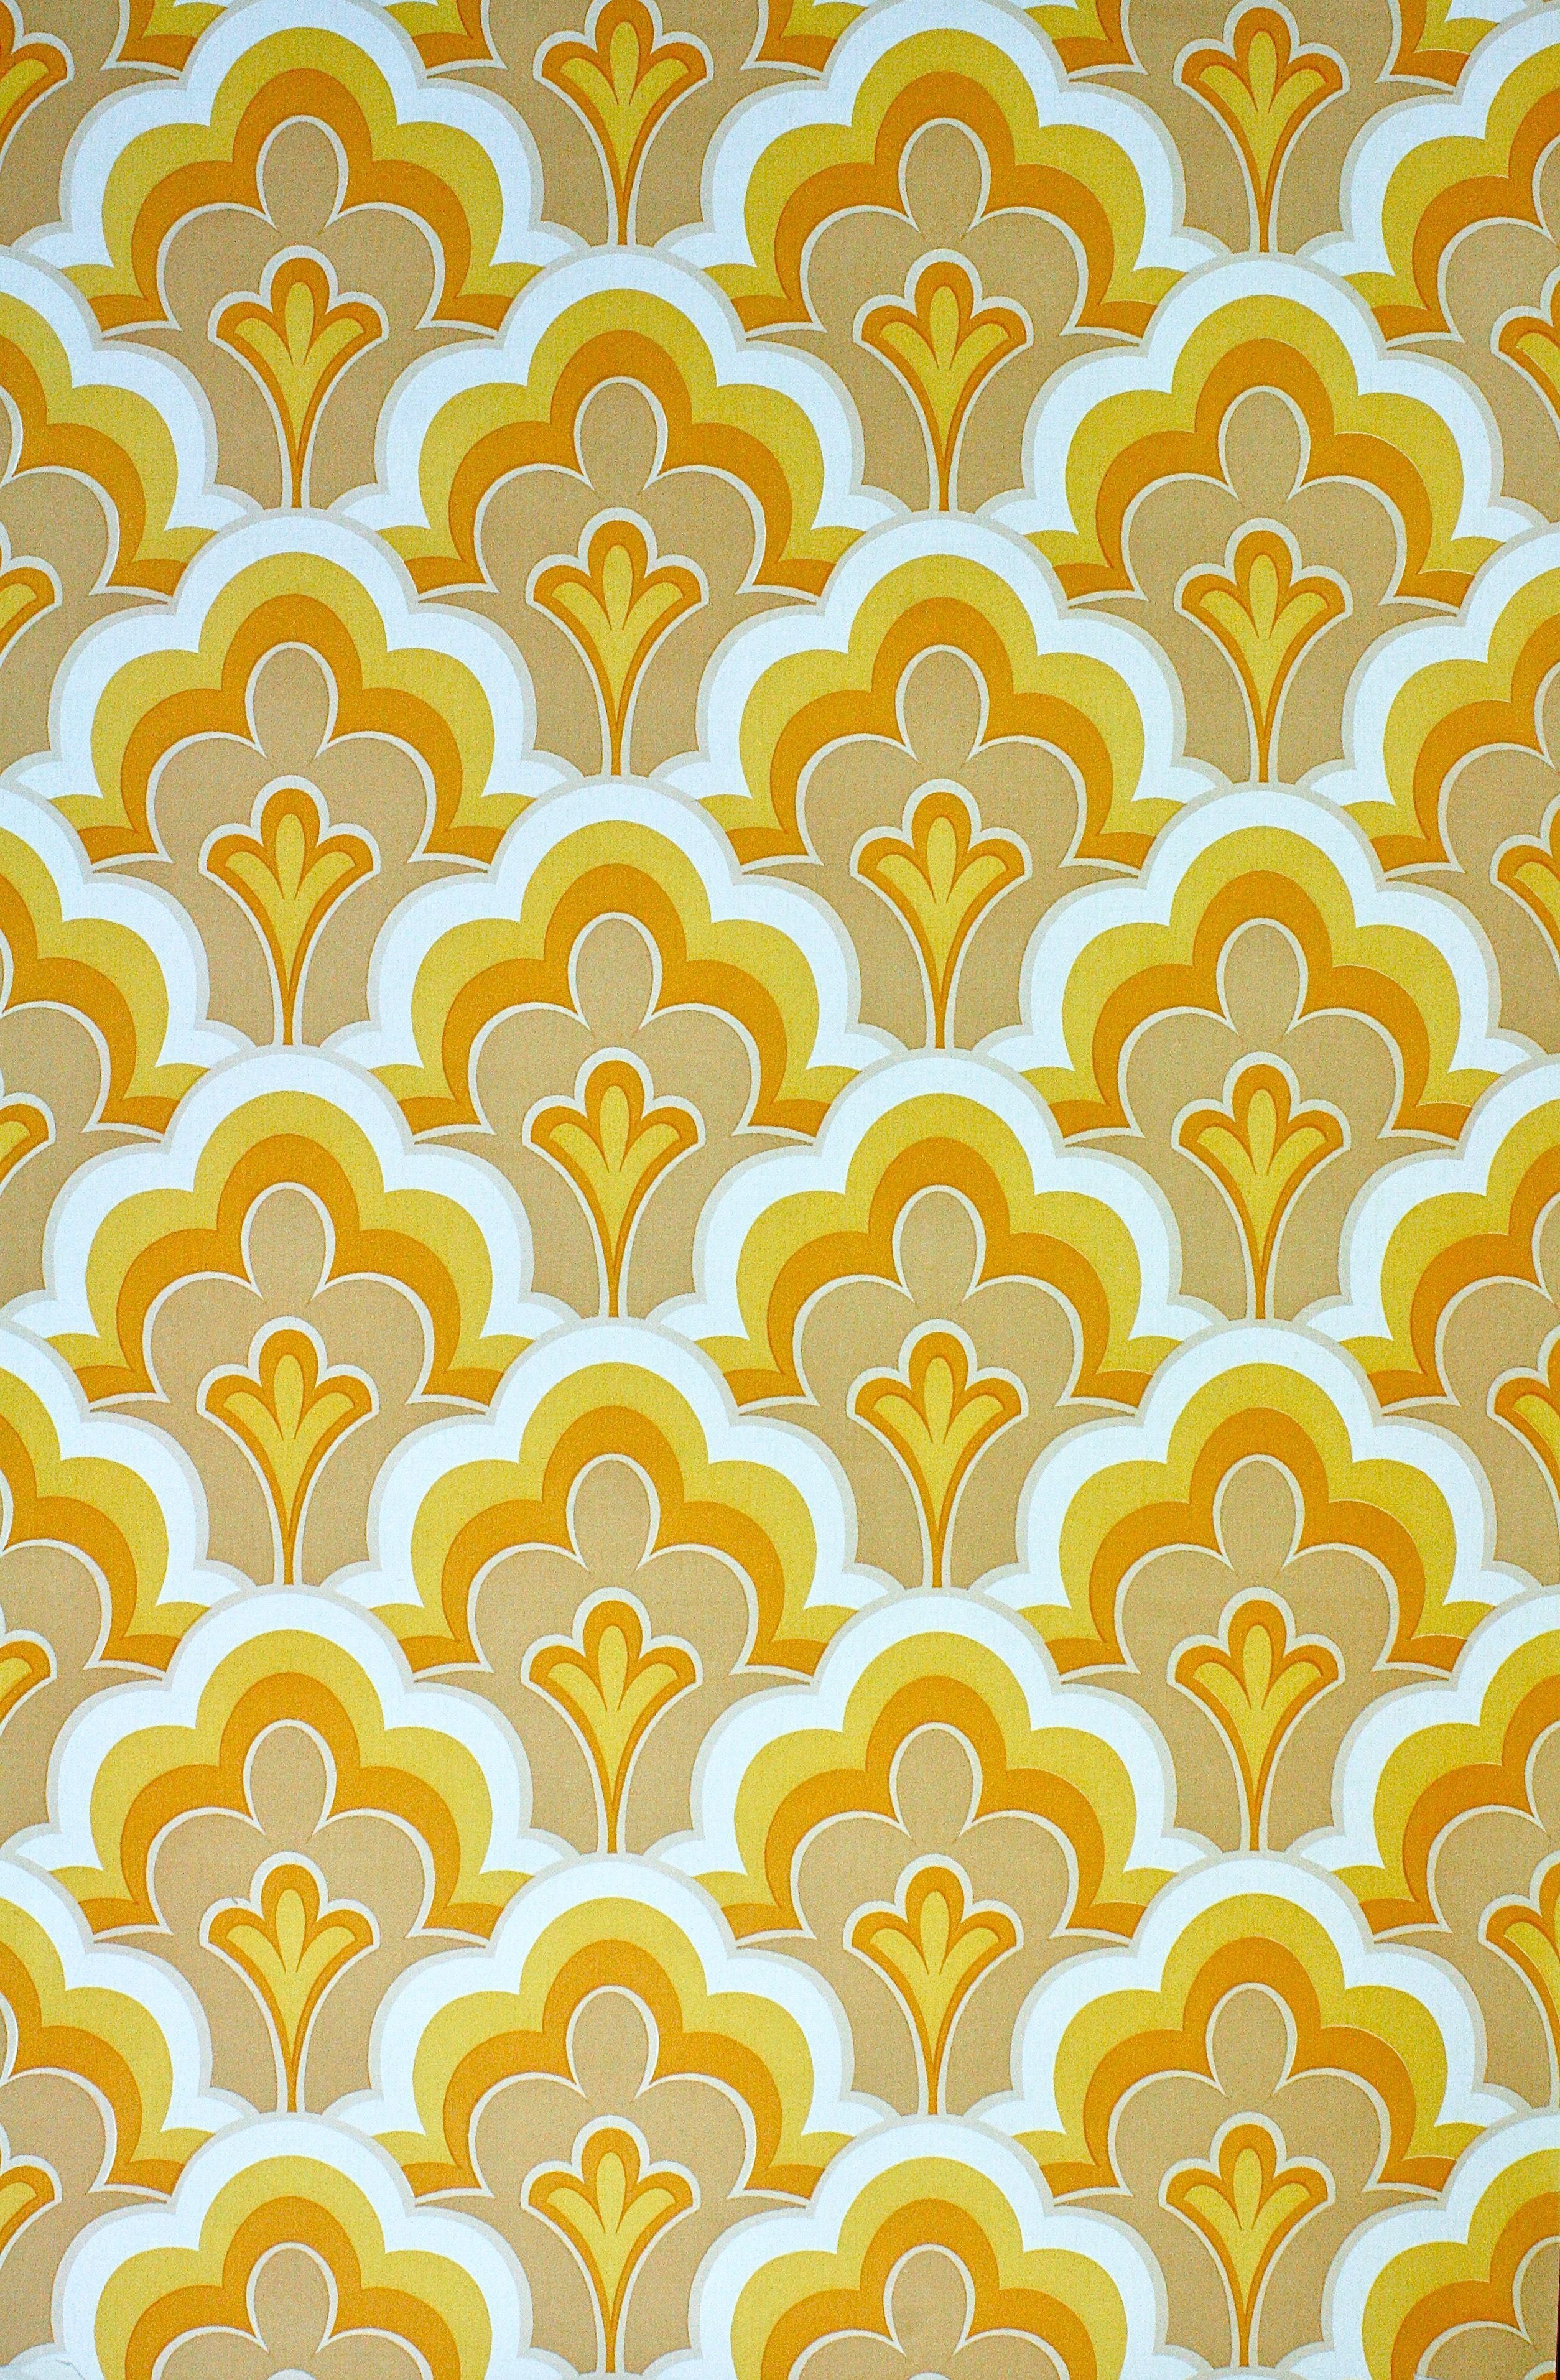 A yellow and white patterned wallpaper - 70s